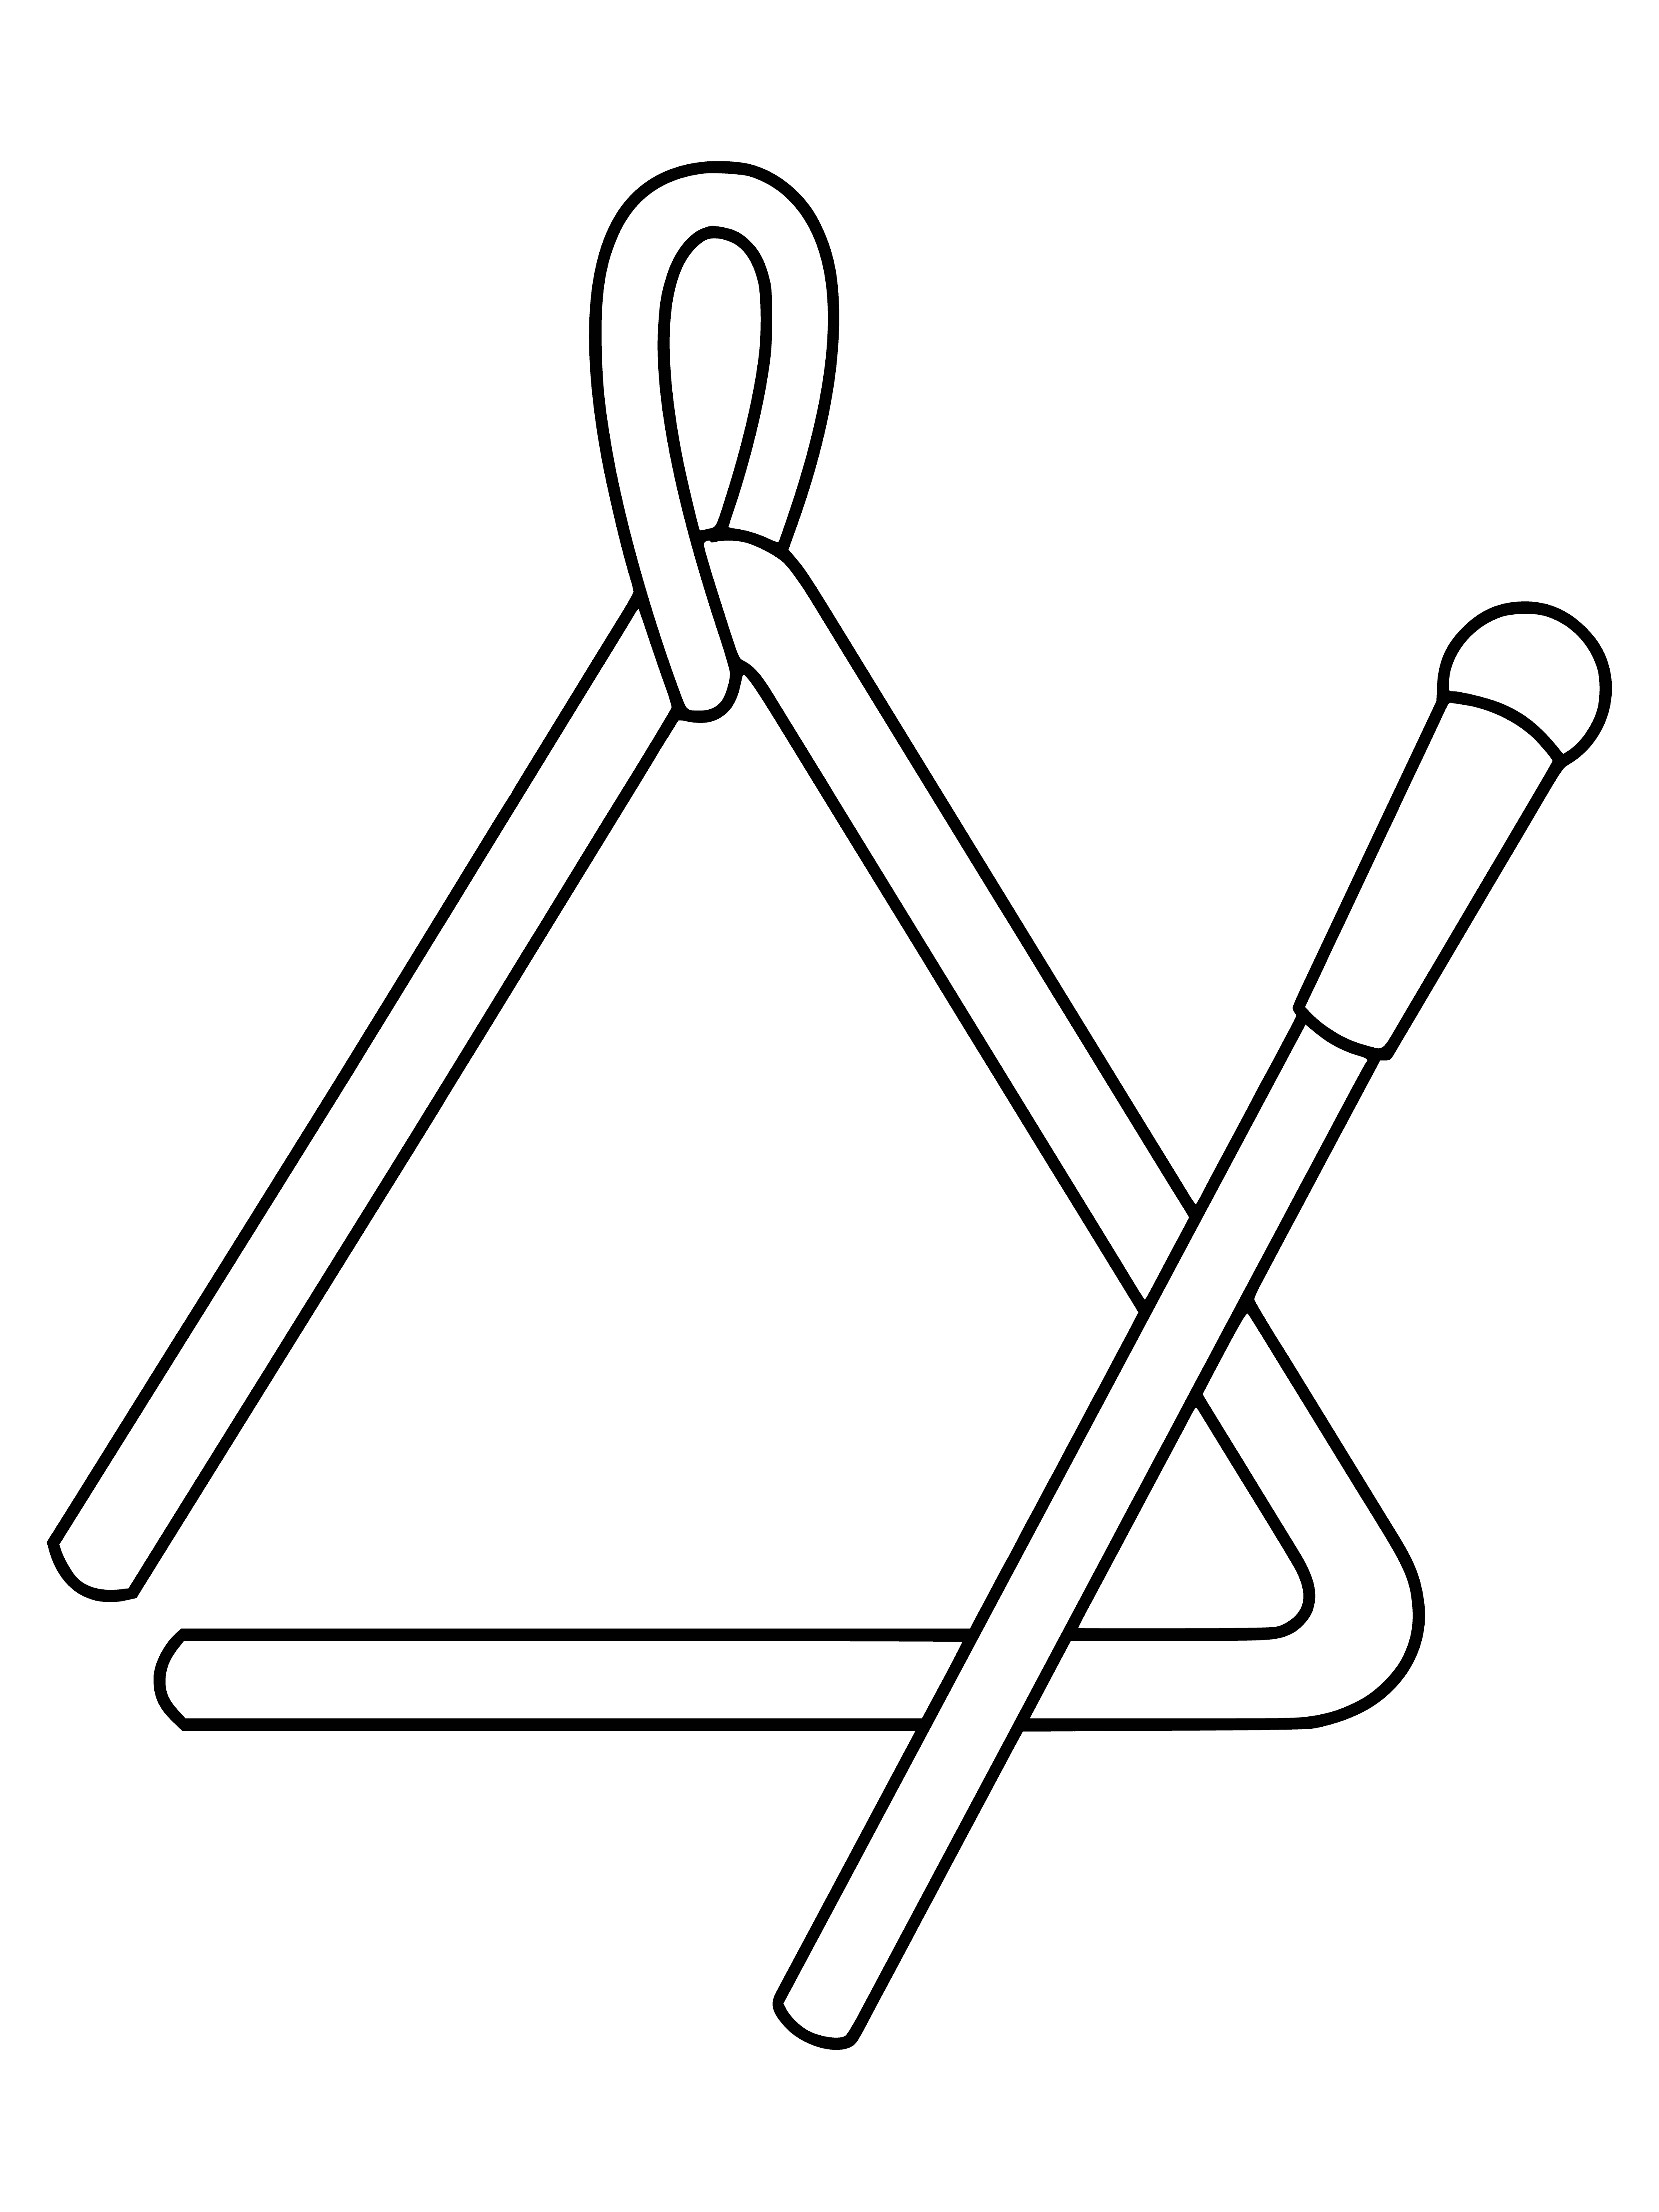 coloring page: A musical triangle is suspended from a wire and produces different tones when struck. #music #instruments